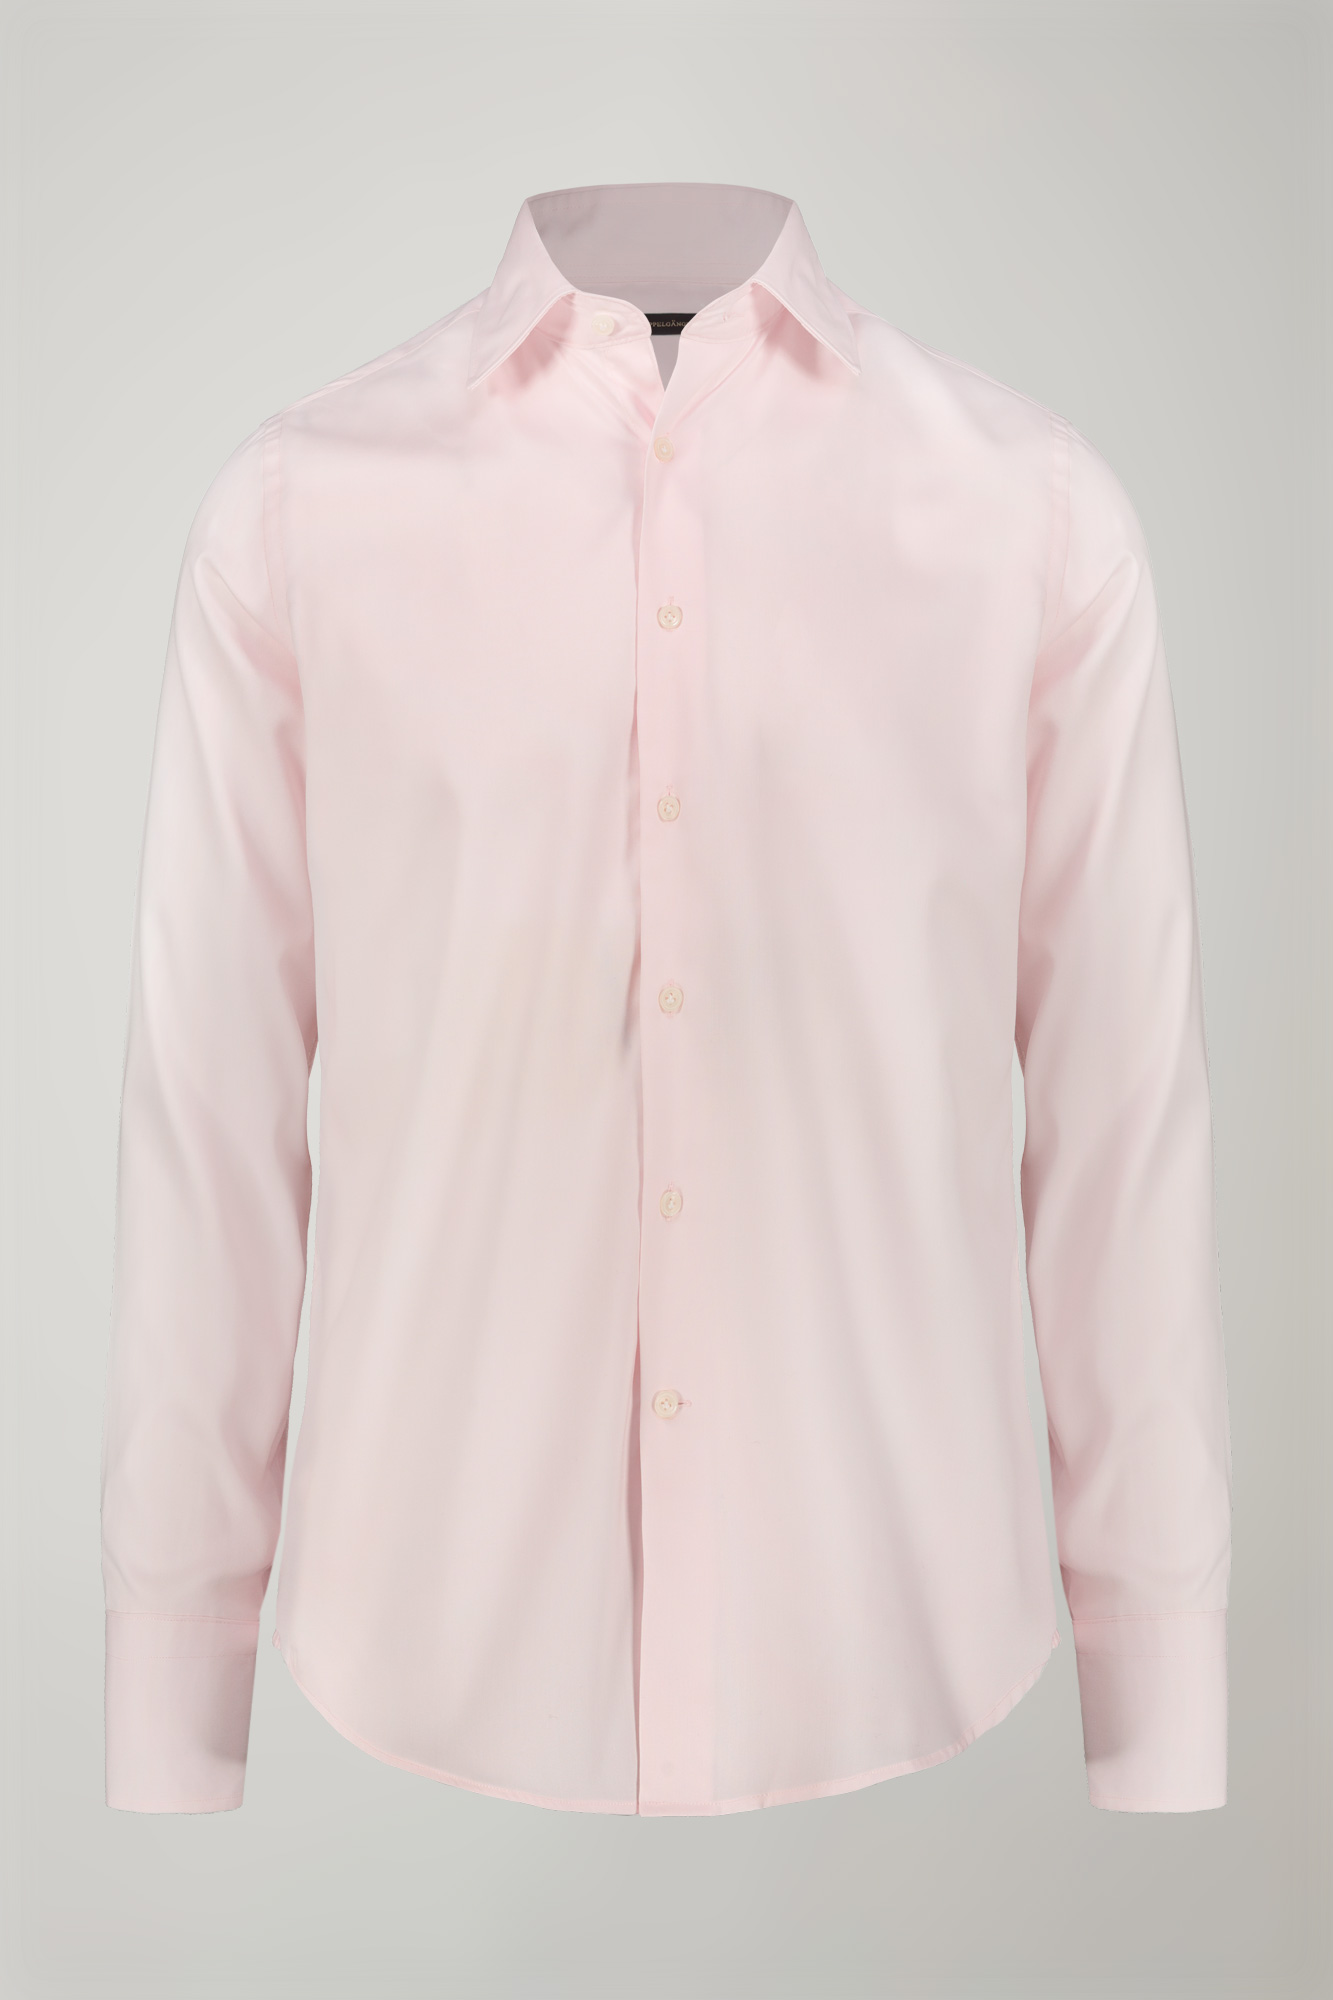 Men's shirt with classic collar 100% cotton oxford fabric regular fit image number null